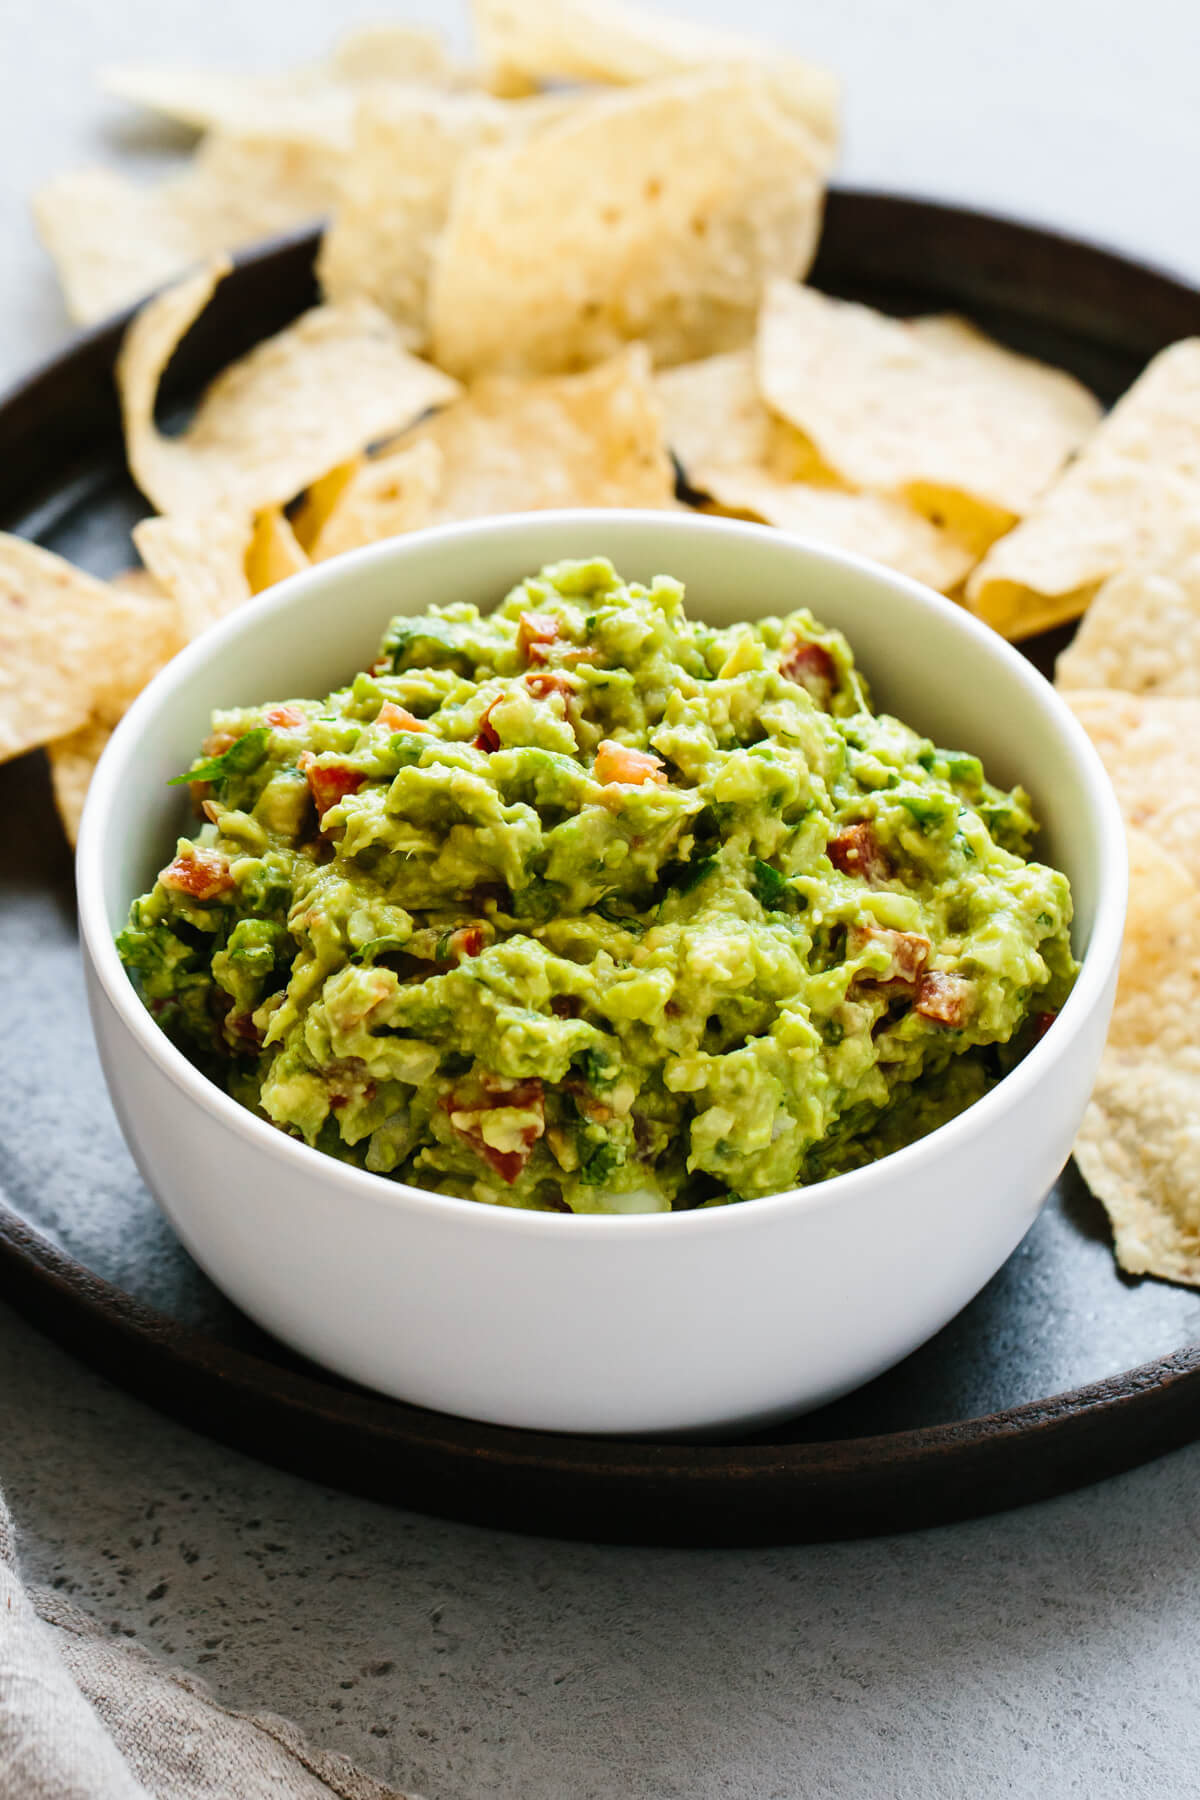 A bowl of fresh, authentic guacamole next to tortilla chips.